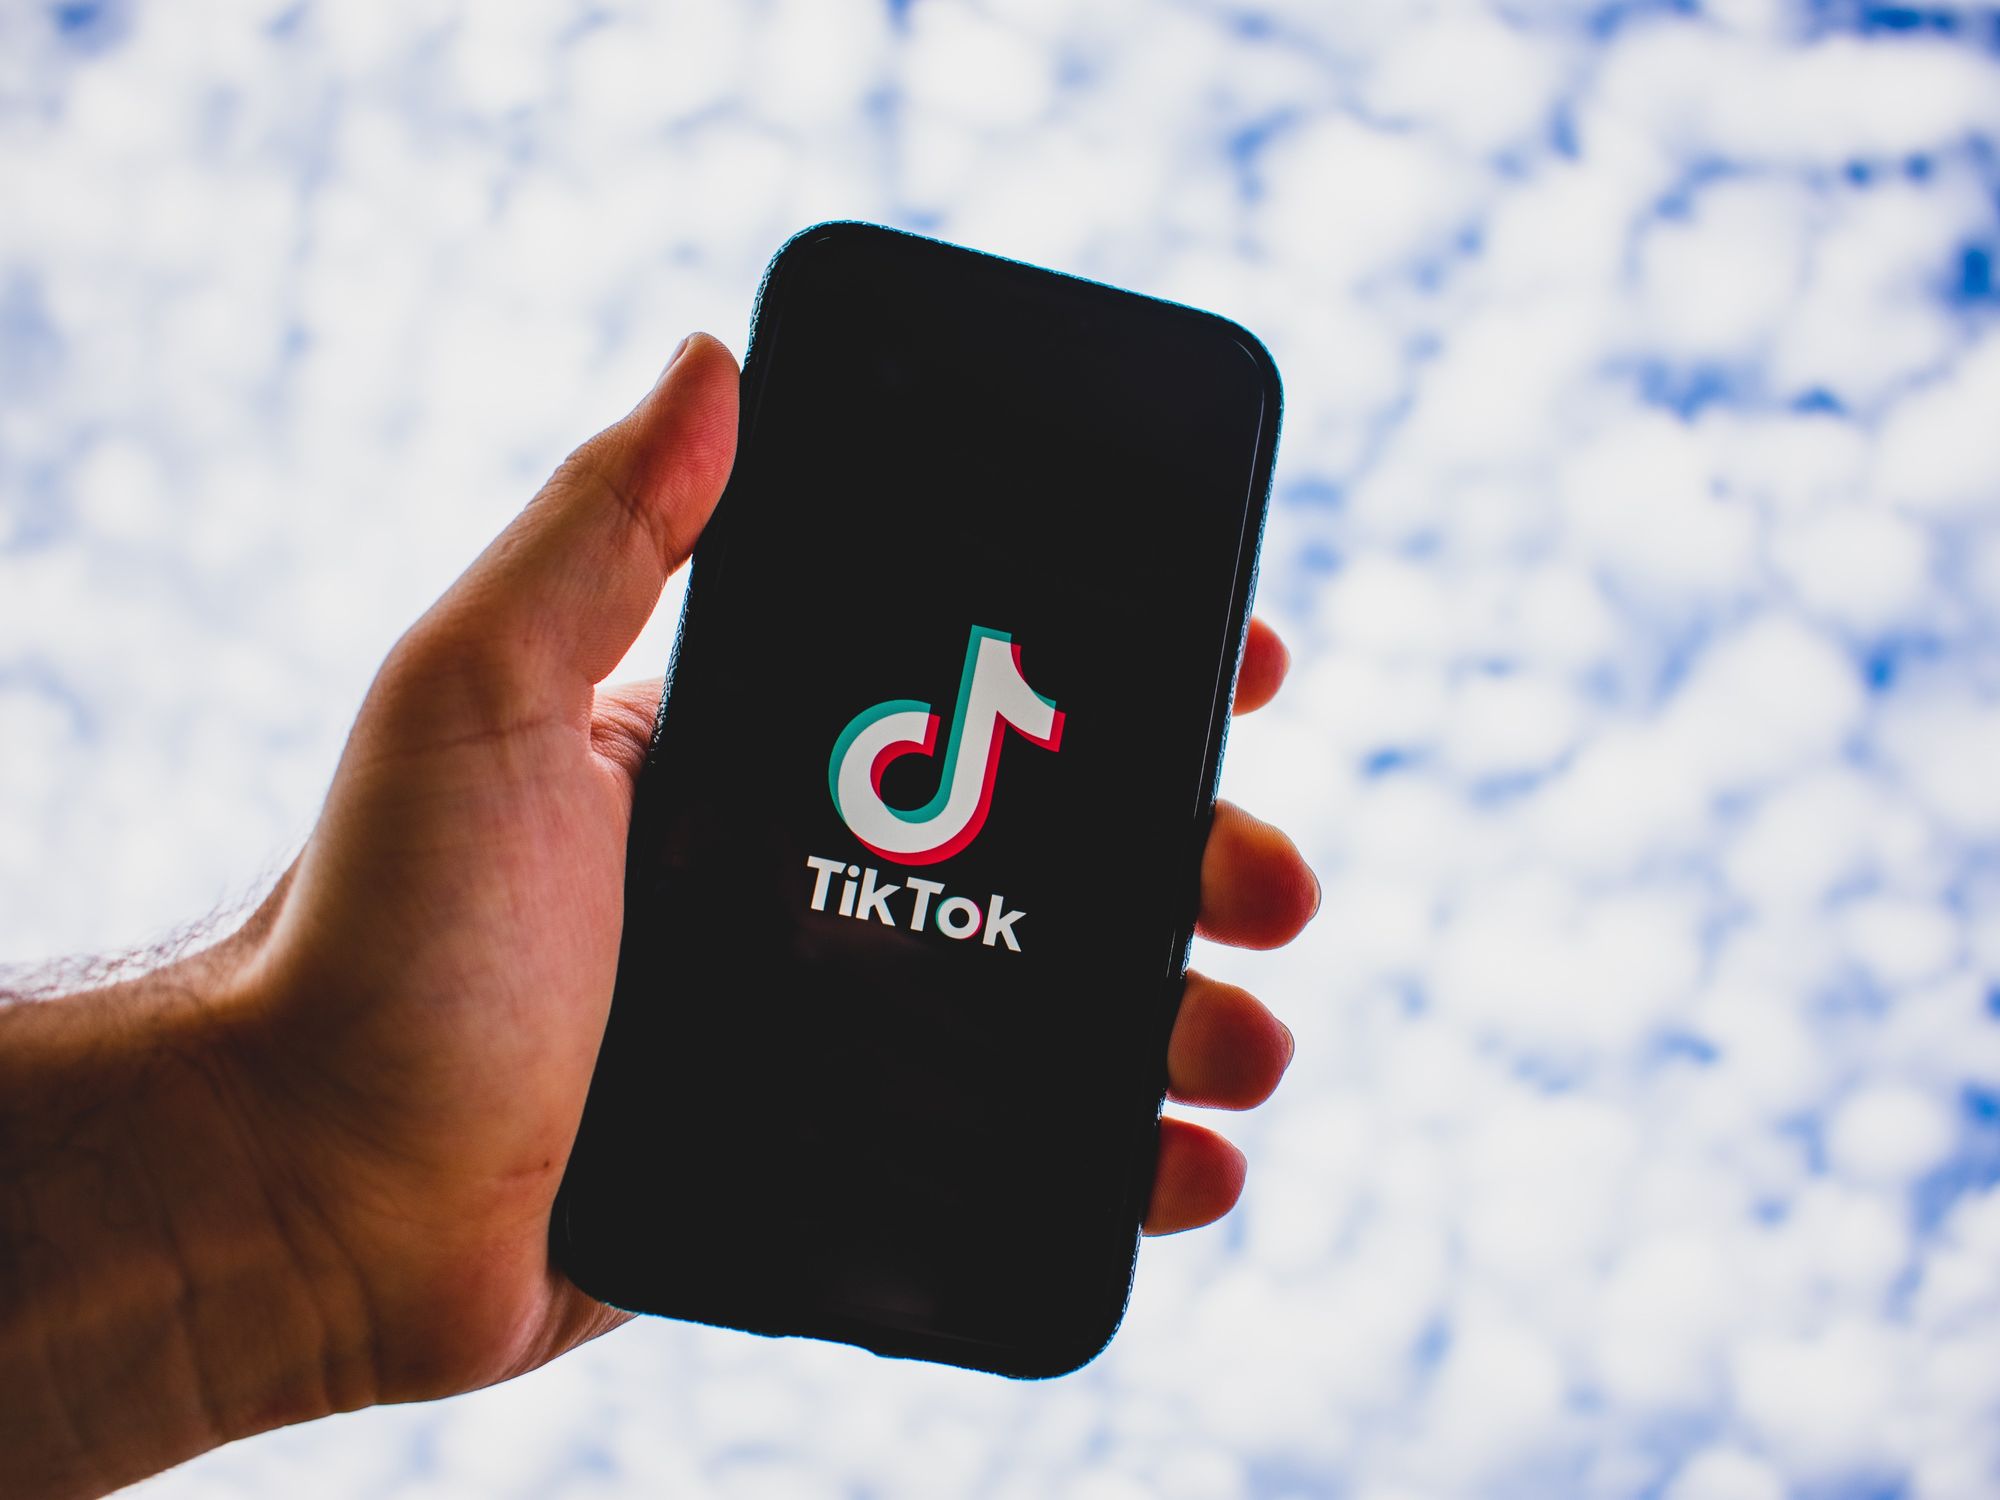 Not Just Lip-Synched Videos: TikTok Experiments with Recruiting and Ecommerce